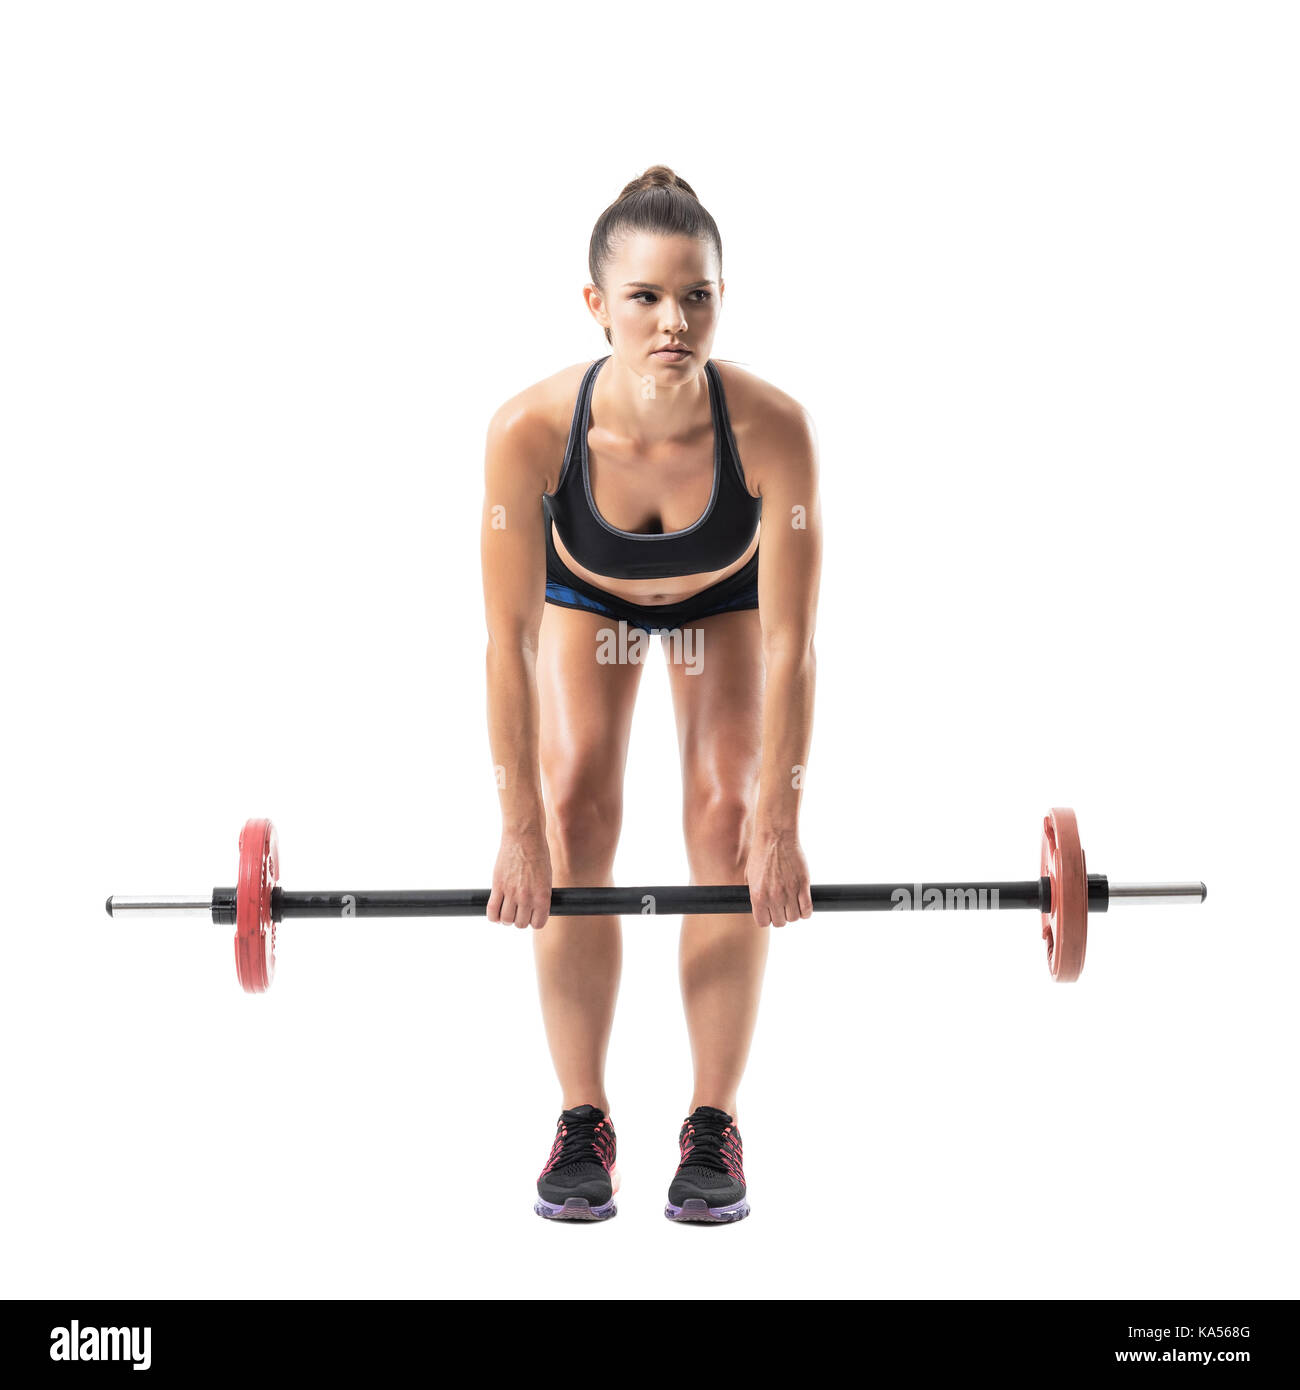 Front view of bent female athlete doing dead lift exercise with barbell looking away. Full body length portrait isolated on white studio background. Stock Photo